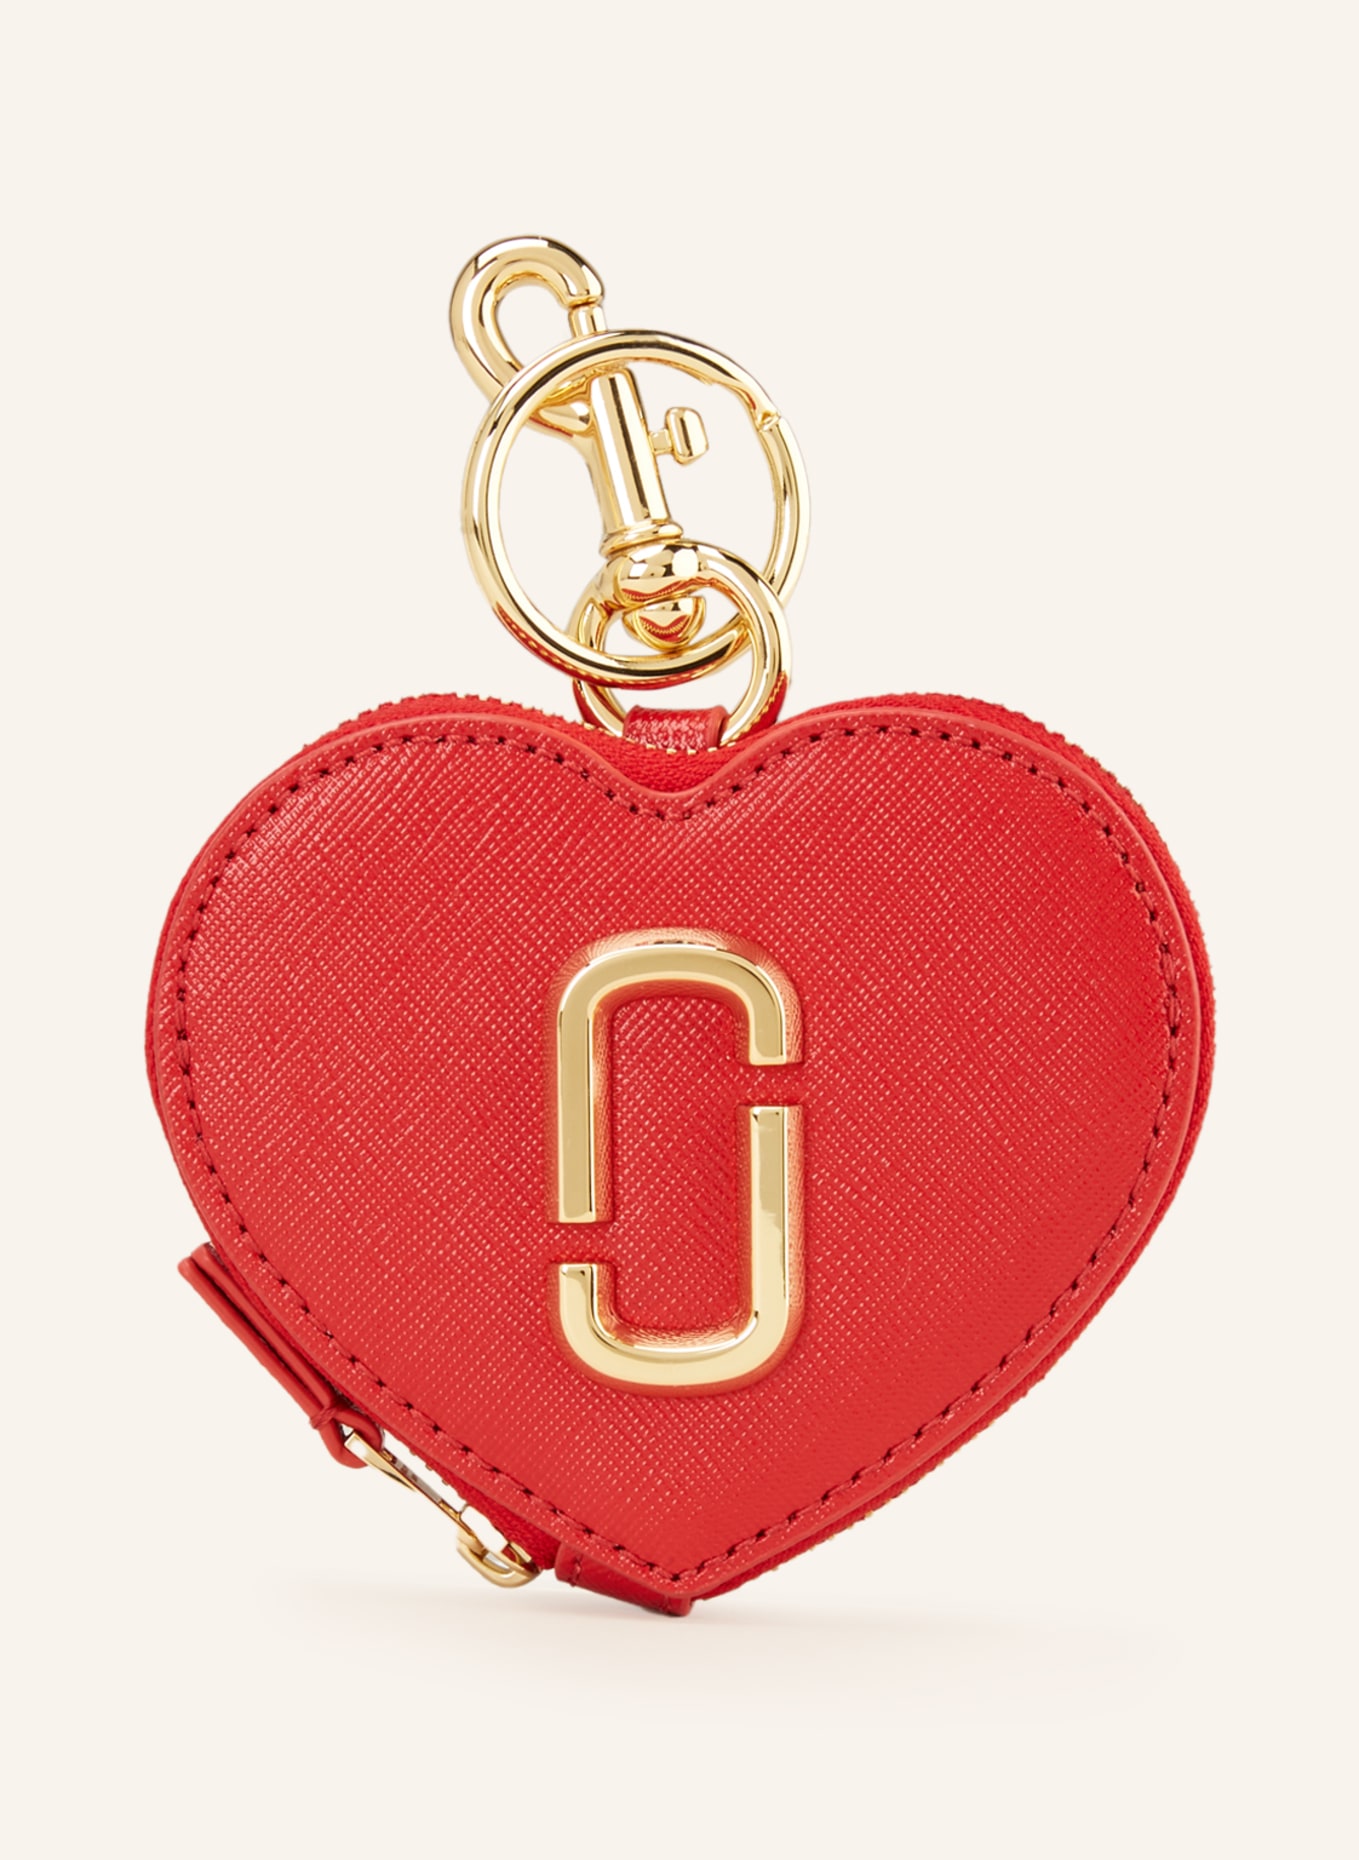 MARC JACOBS Münzetui THE HEART POUCH, Farbe: DUNKELROT/ GOLD (Bild 1)